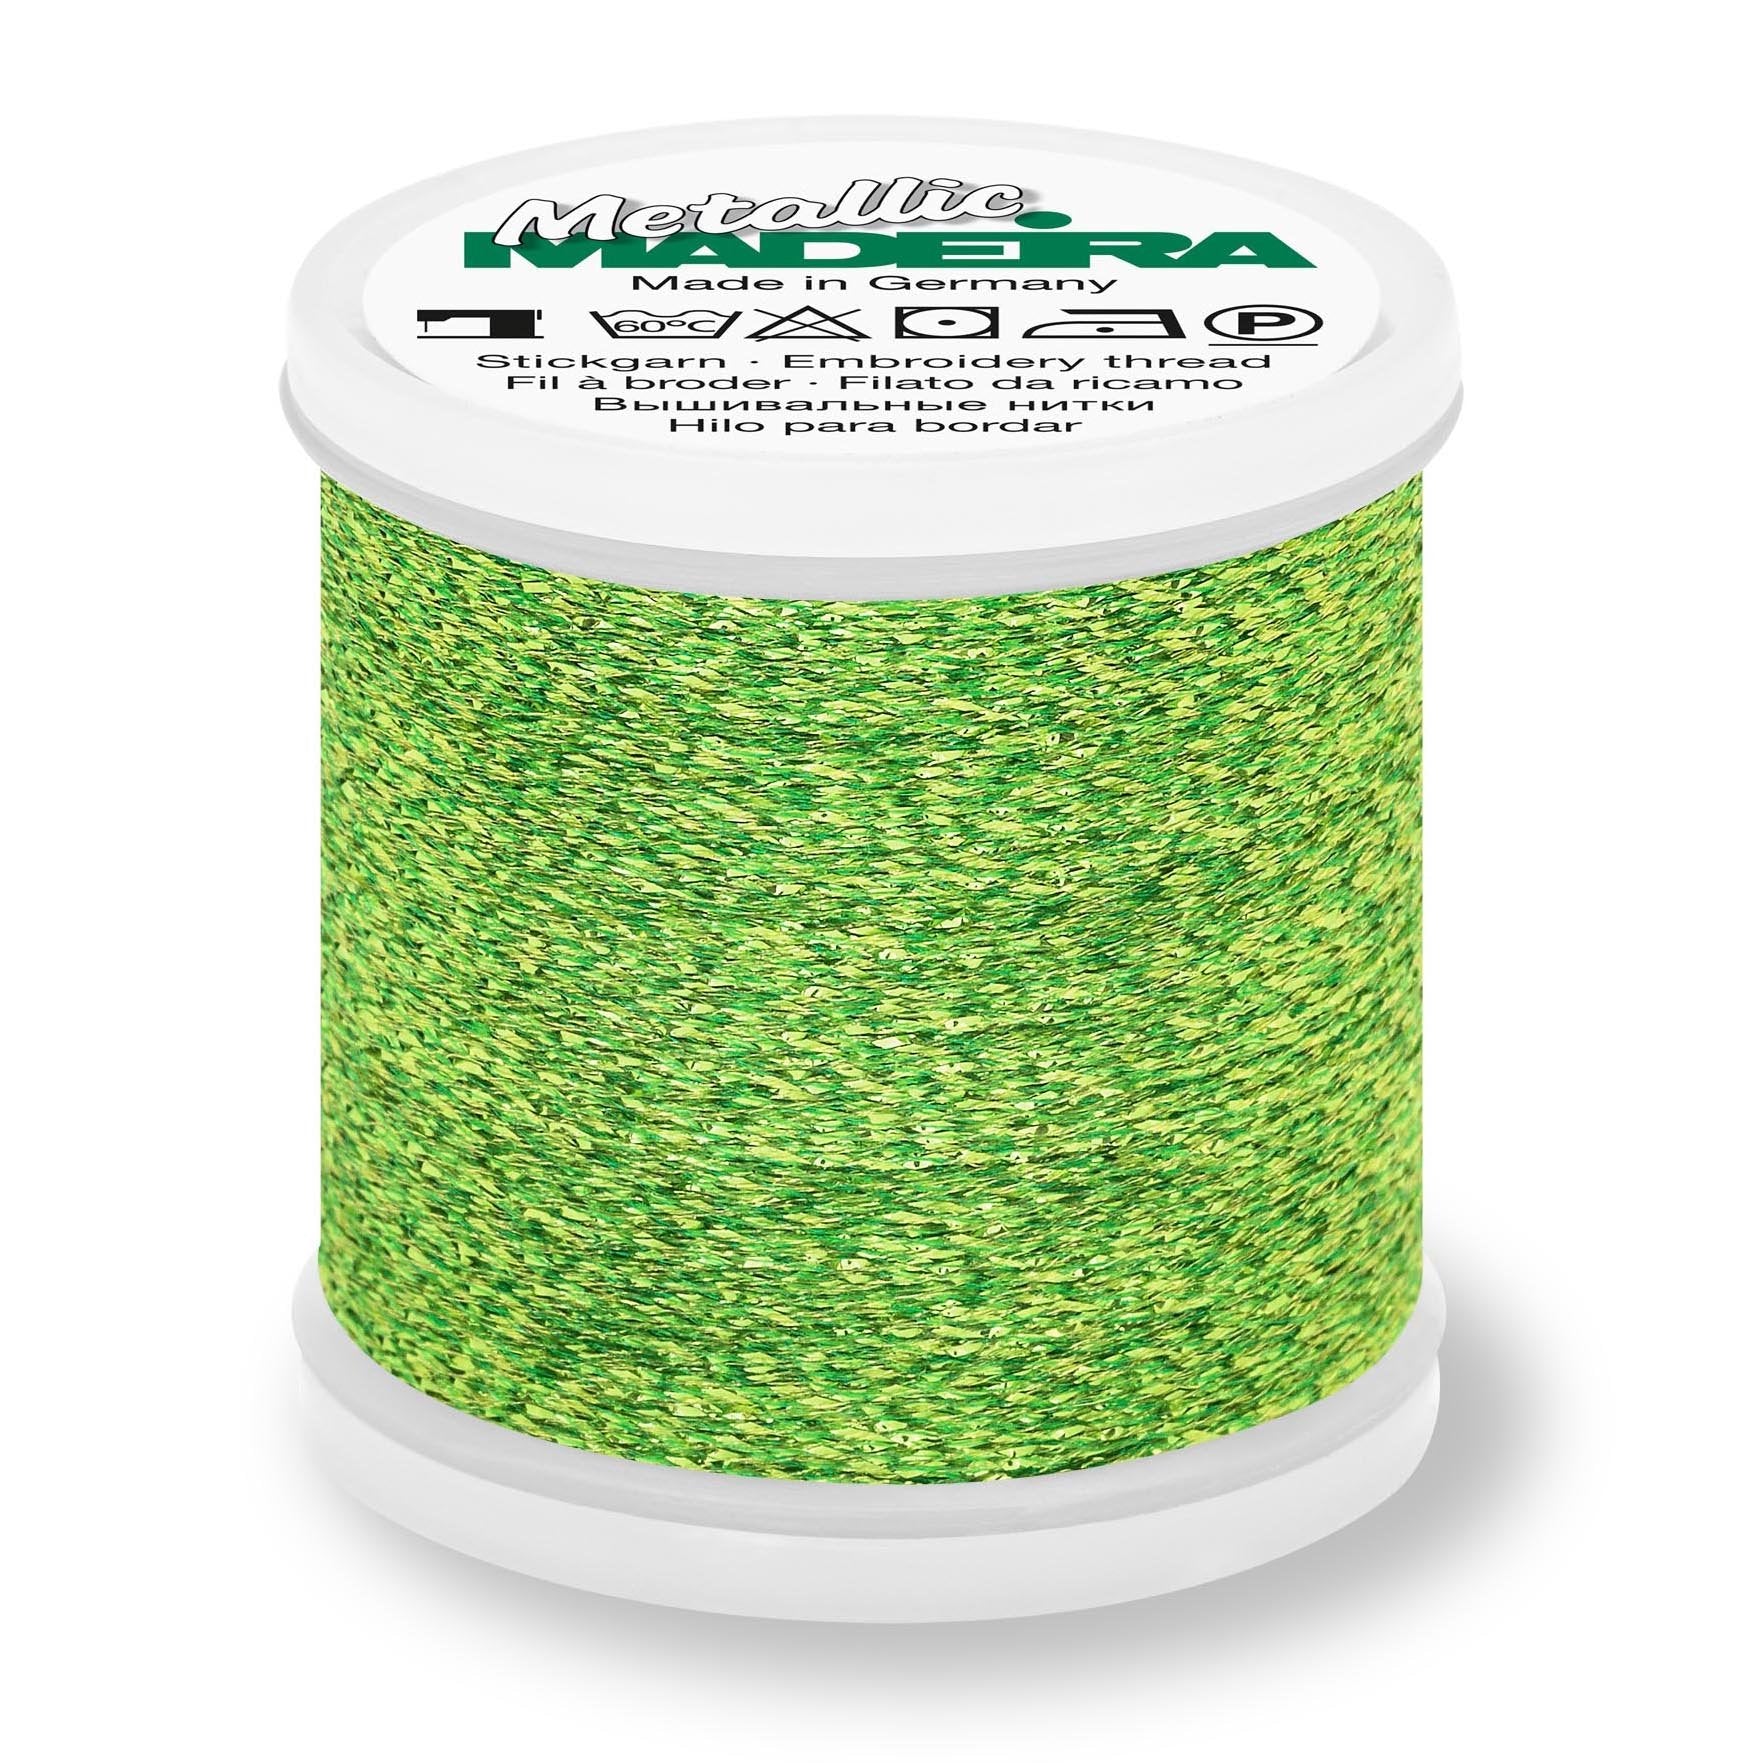 Madeira Textured Metallic Embroidery Thread, 200m Gold Green from Jaycotts Sewing Supplies